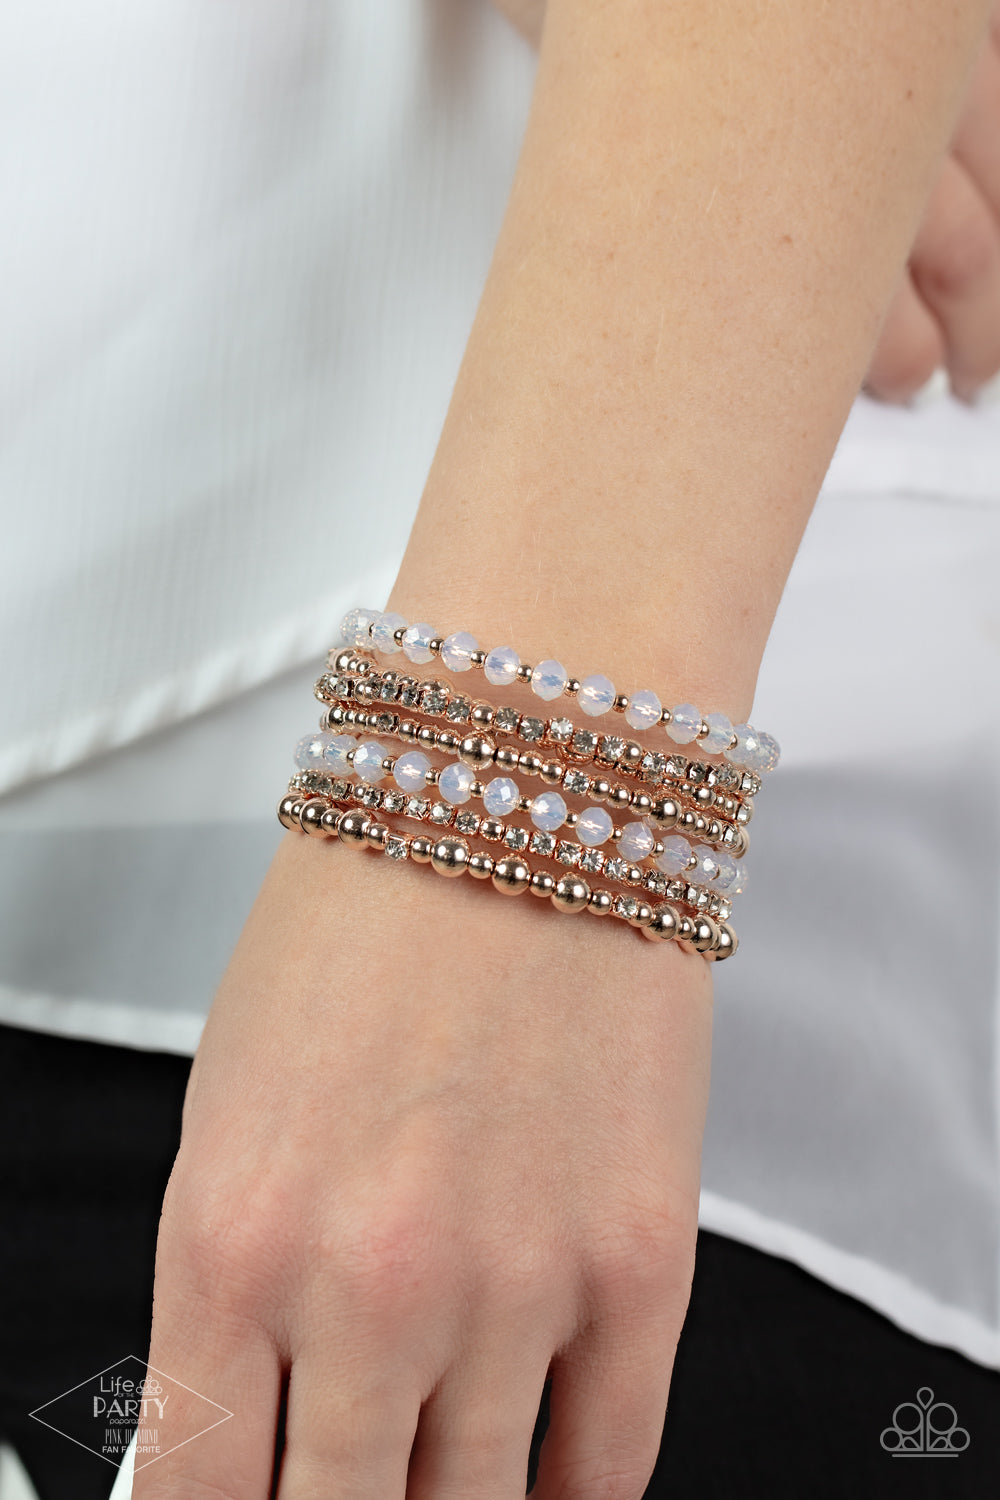 ICE Knowing You - Rose Gold Coil Fashion Bracelet - Paparazzi Accessories - An icy collection of rose gold beads, rose gold cubes, opaque crystals, and glassy white rhinestones are threaded along a coiled wire, creating a blinding infinity wrap style bracelet around the wrist.